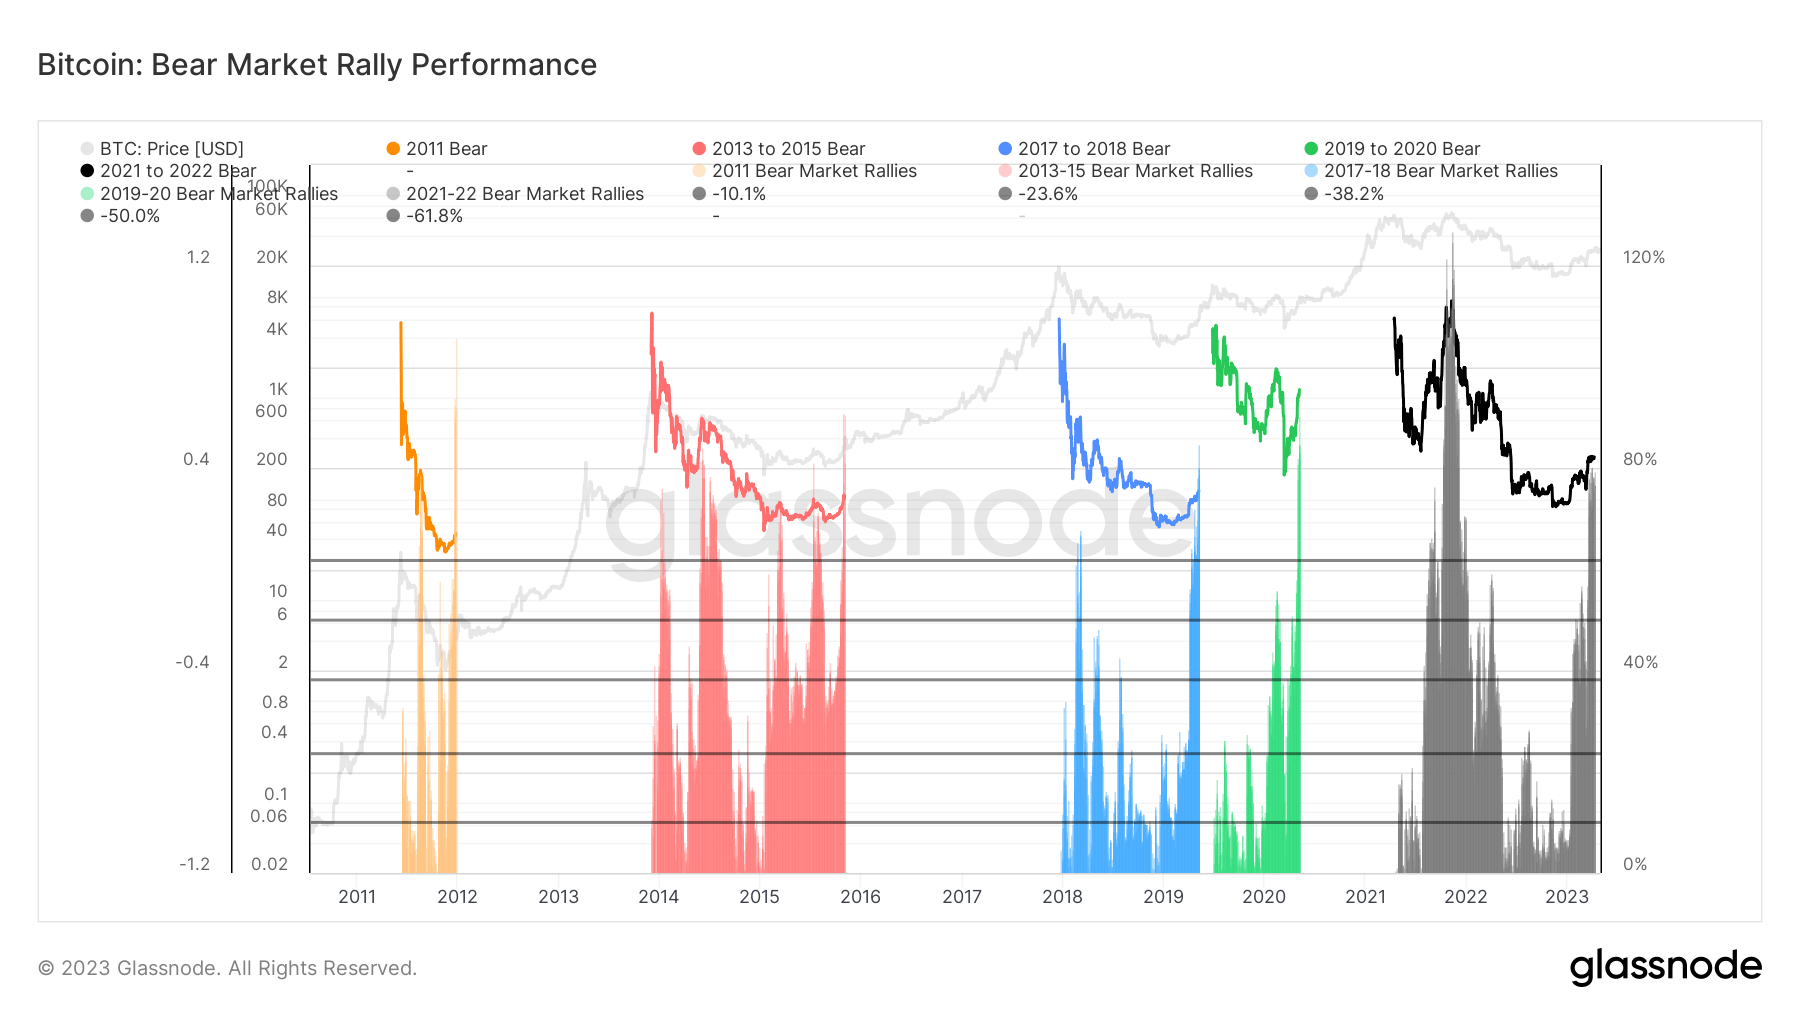 Bitcoin bear market rally performance, how does it compare to previous cycles?